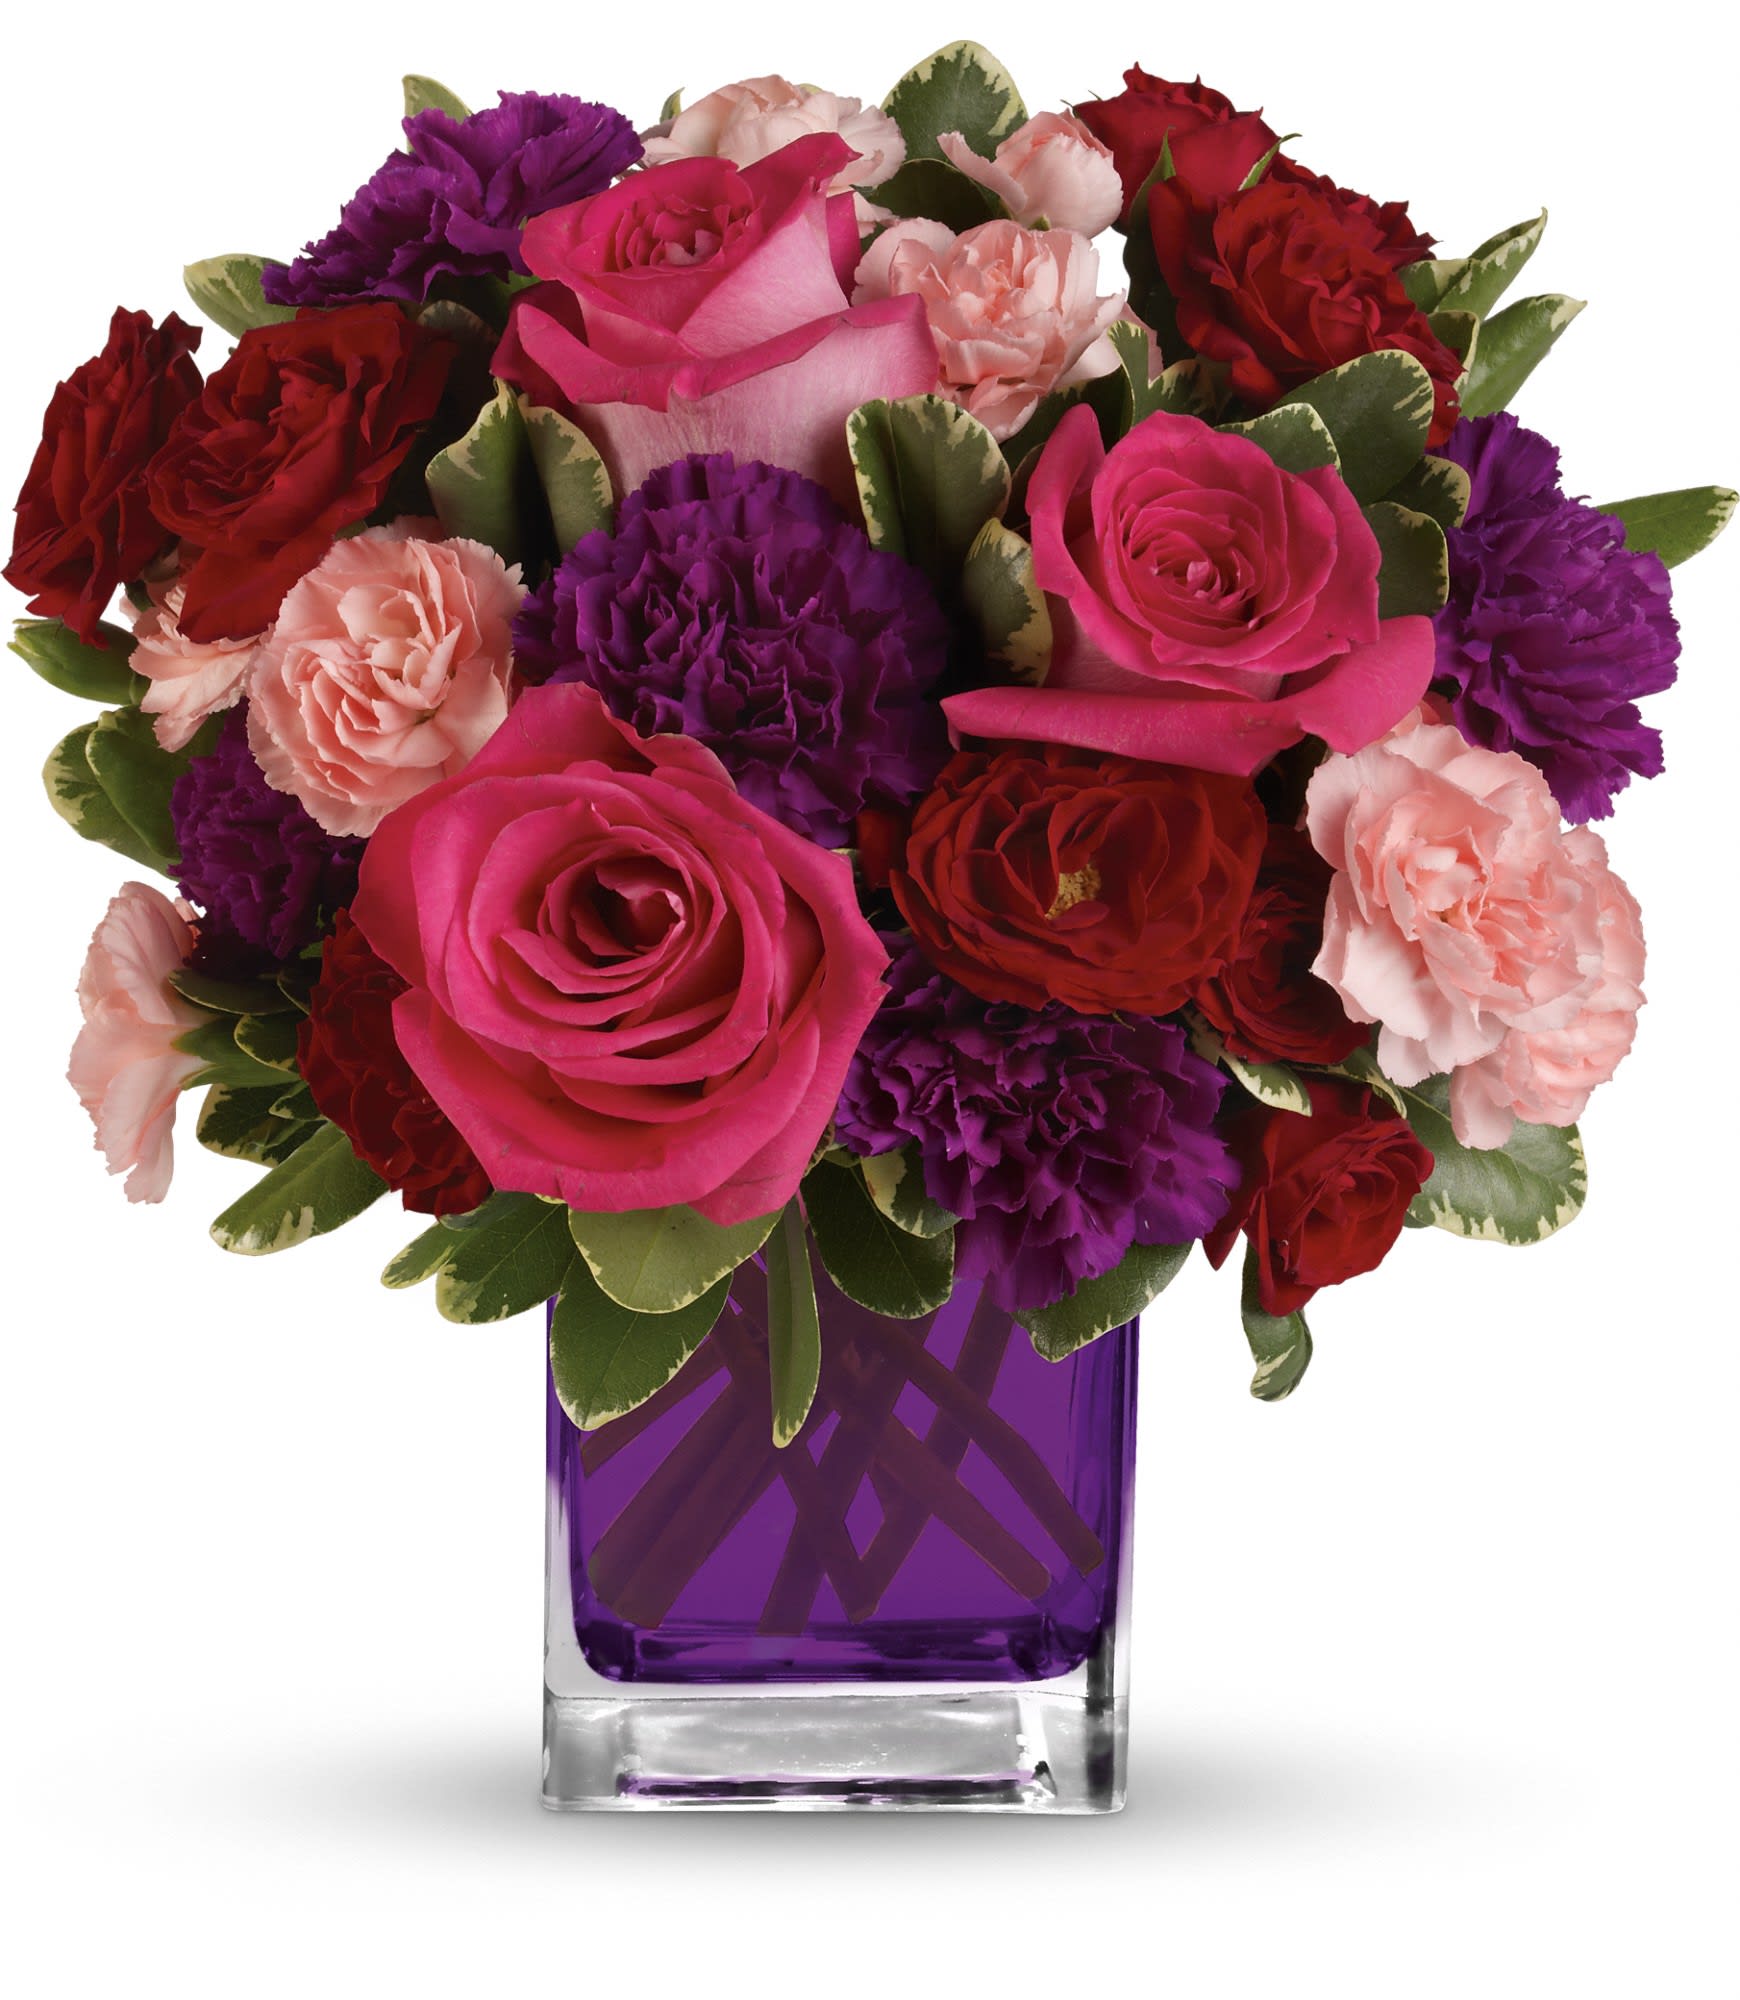 Bejeweled Beauty by Teleflora - Pure romance. Hot pink roses and dark red spray roses are brightly arranged inside our violet cube.